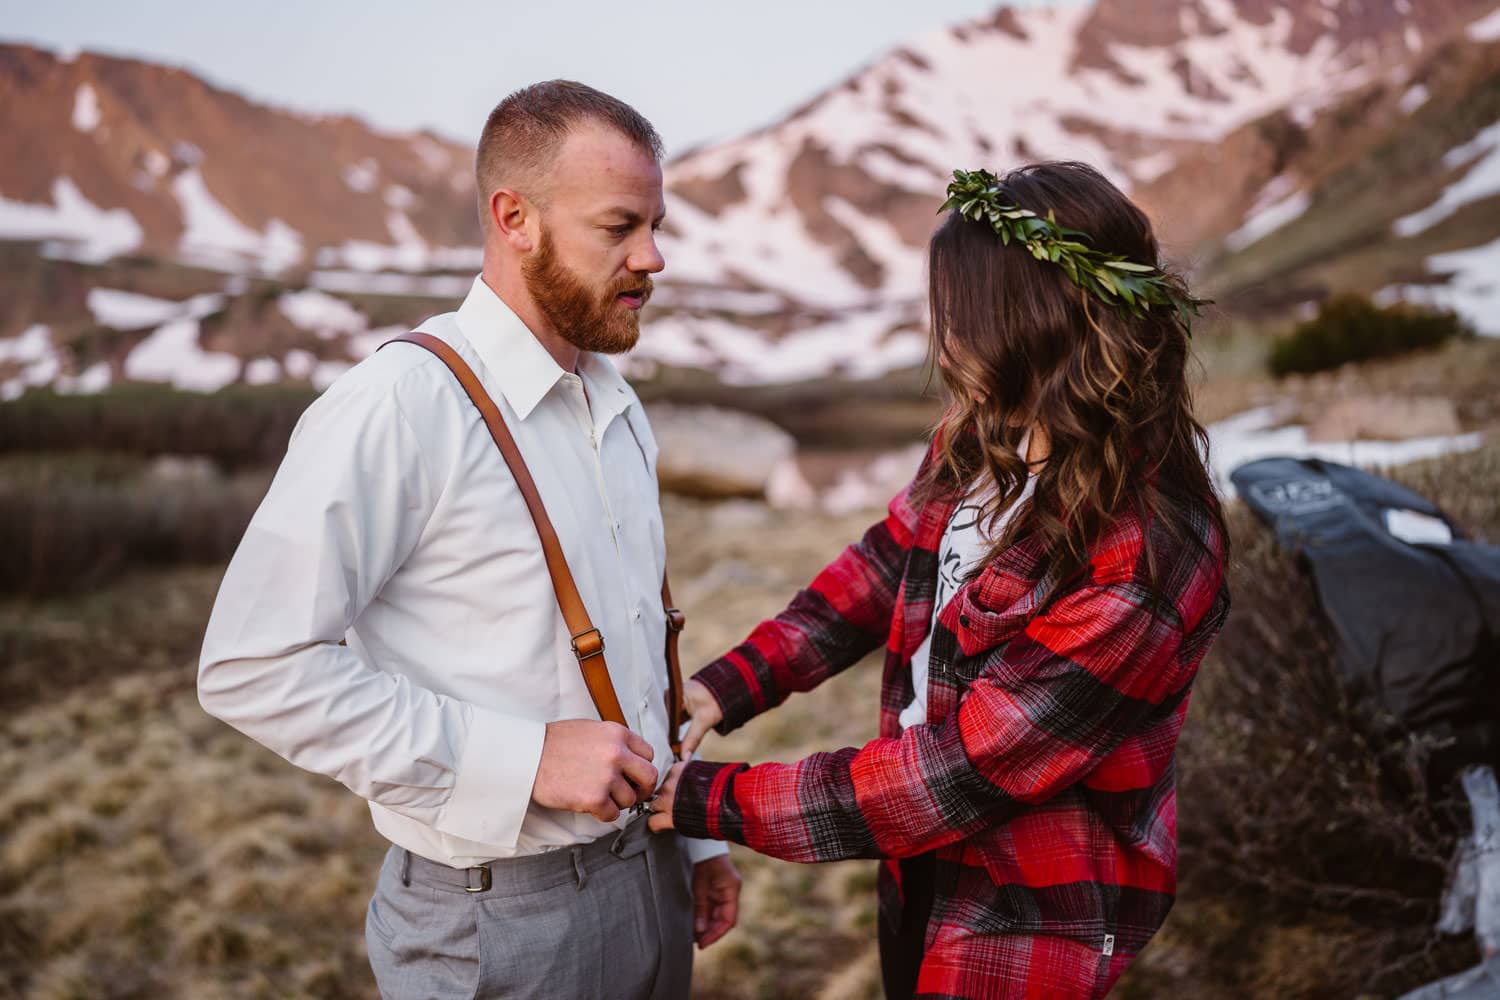 Bride and Groom First Look at Sunrise Elopement in Colorado